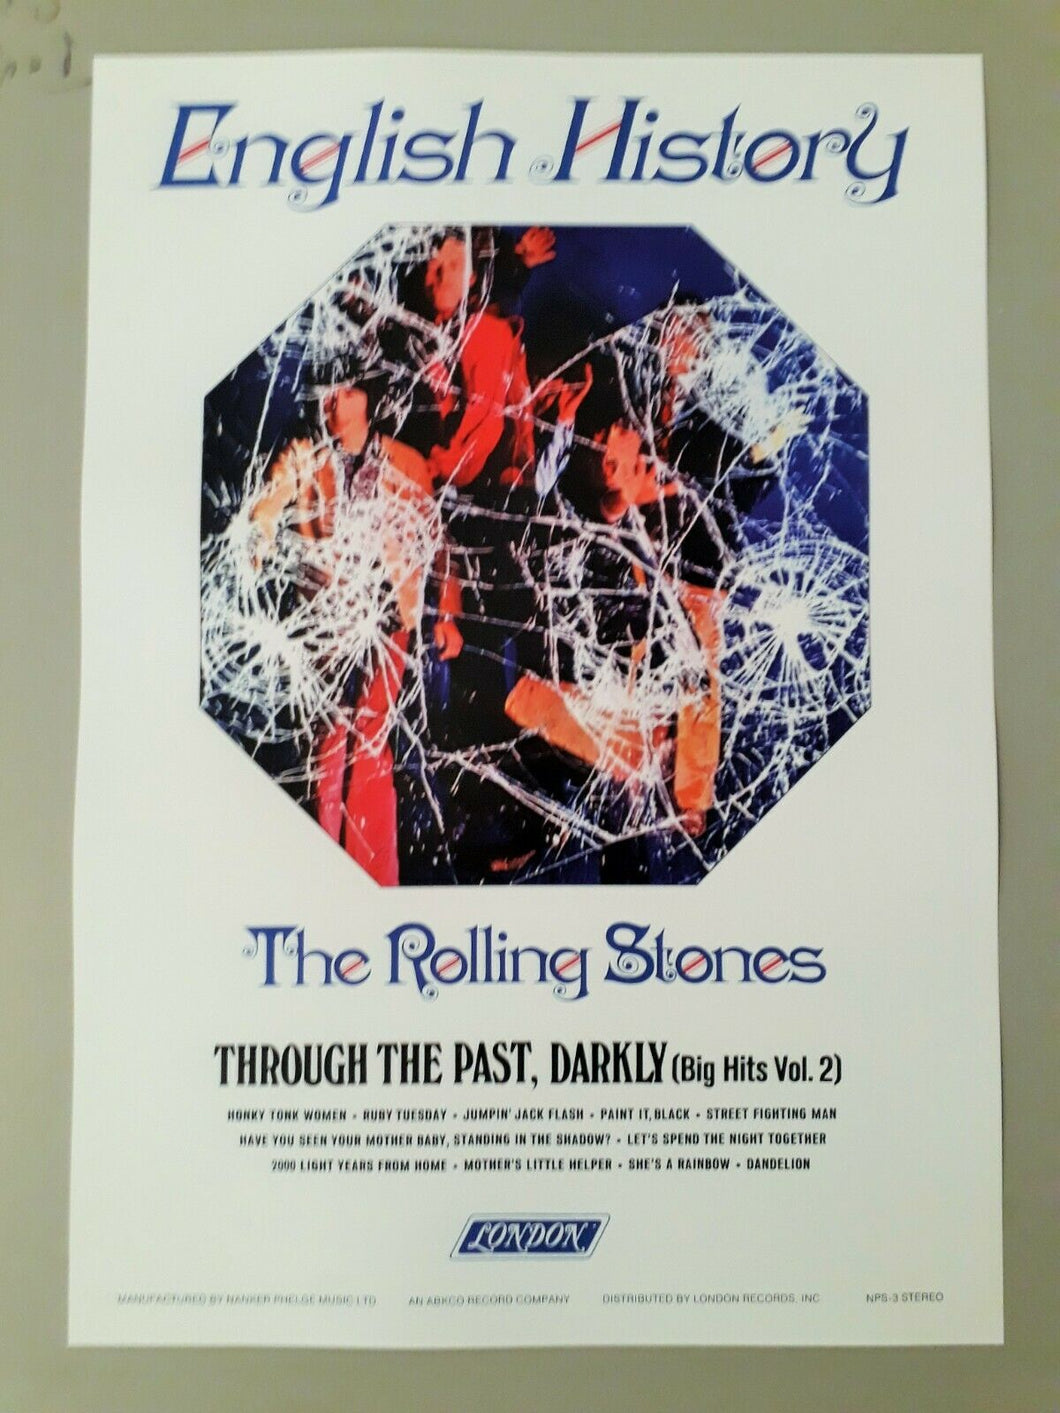 Rolling Stones promotional poster - Through the Past 1969 reprinted edition A3 - Original Music and Movie Posters for sale from Bamalama - Online Poster Store UK London